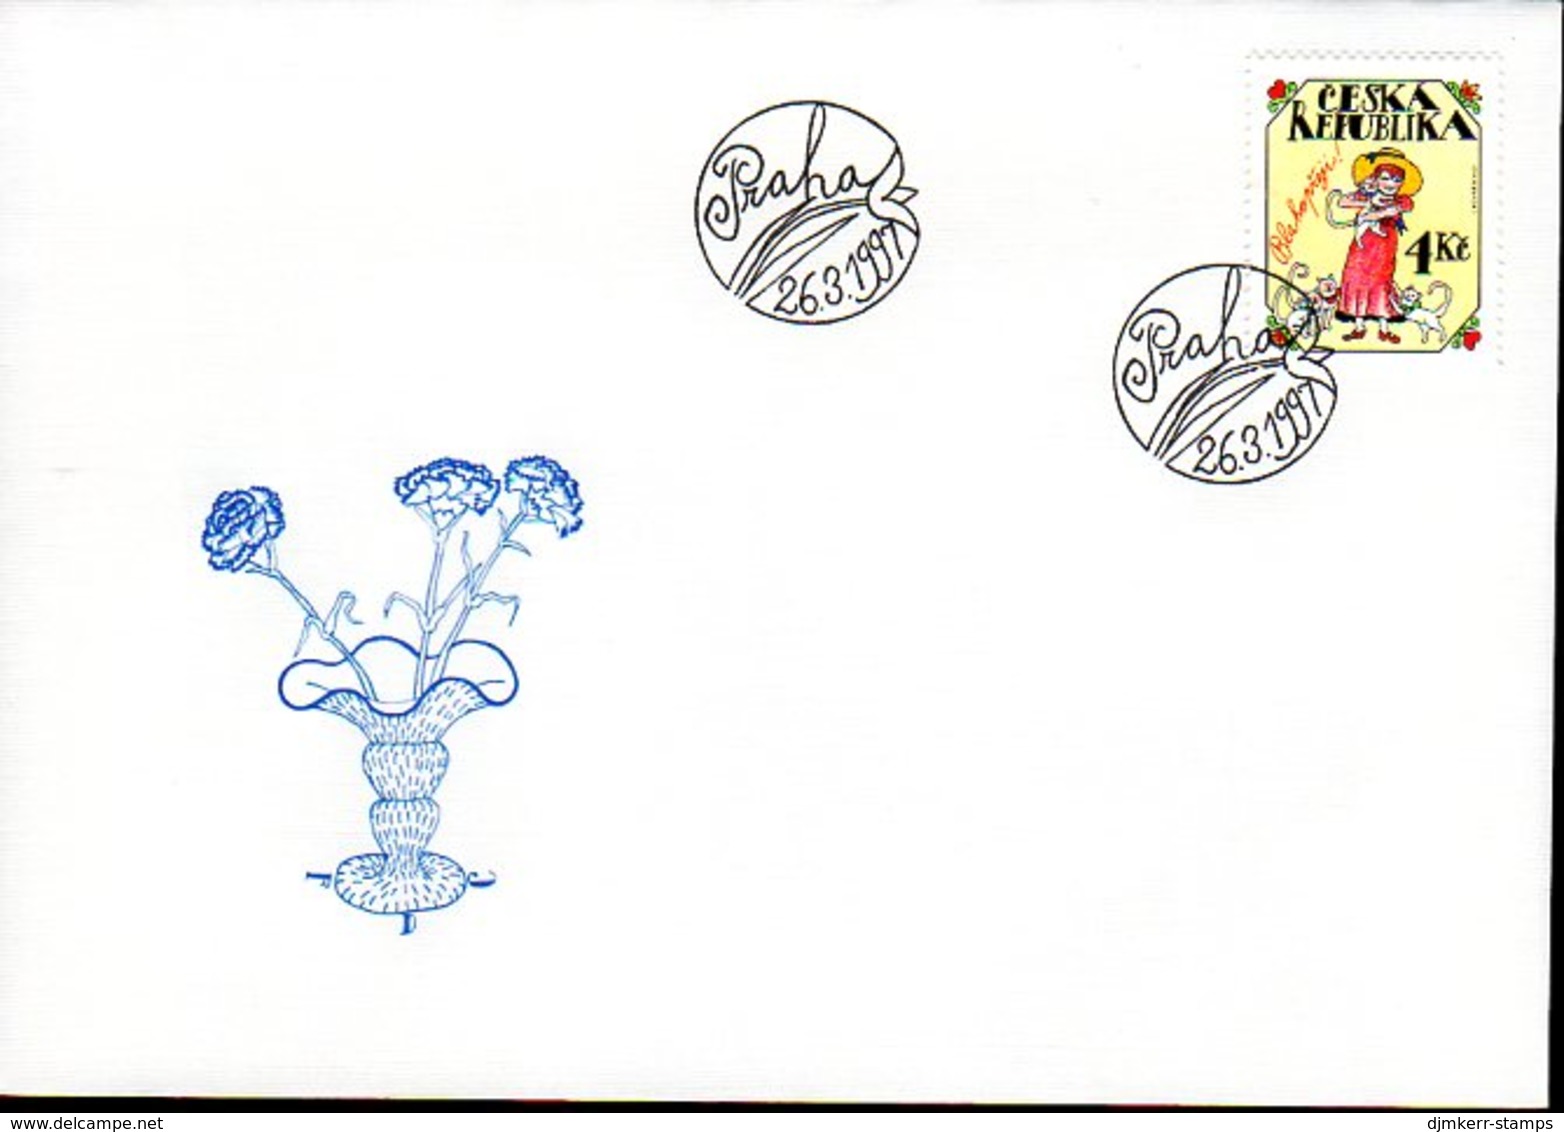 CZECH REPUBLIC 1997 Greetings Stamp On FDC.  Michel 139 - FDC